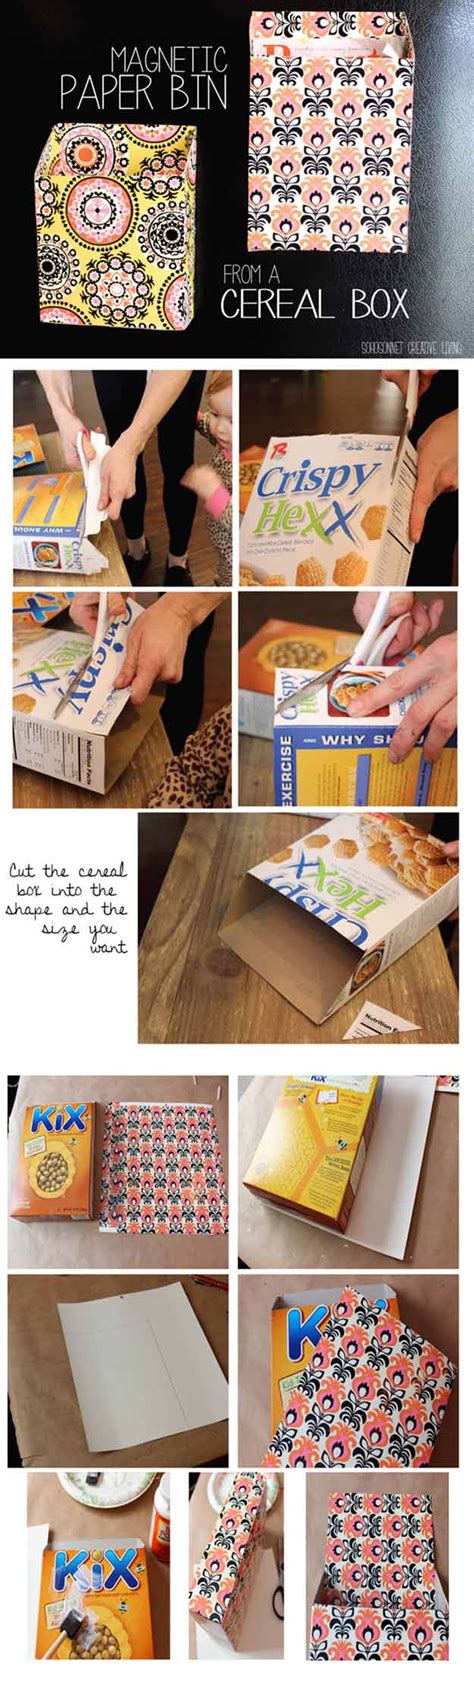 Cereal box book report project | book report template digital and printable. 28 Things You Can Make With Cereal Boxes | DIY Kids Crafts